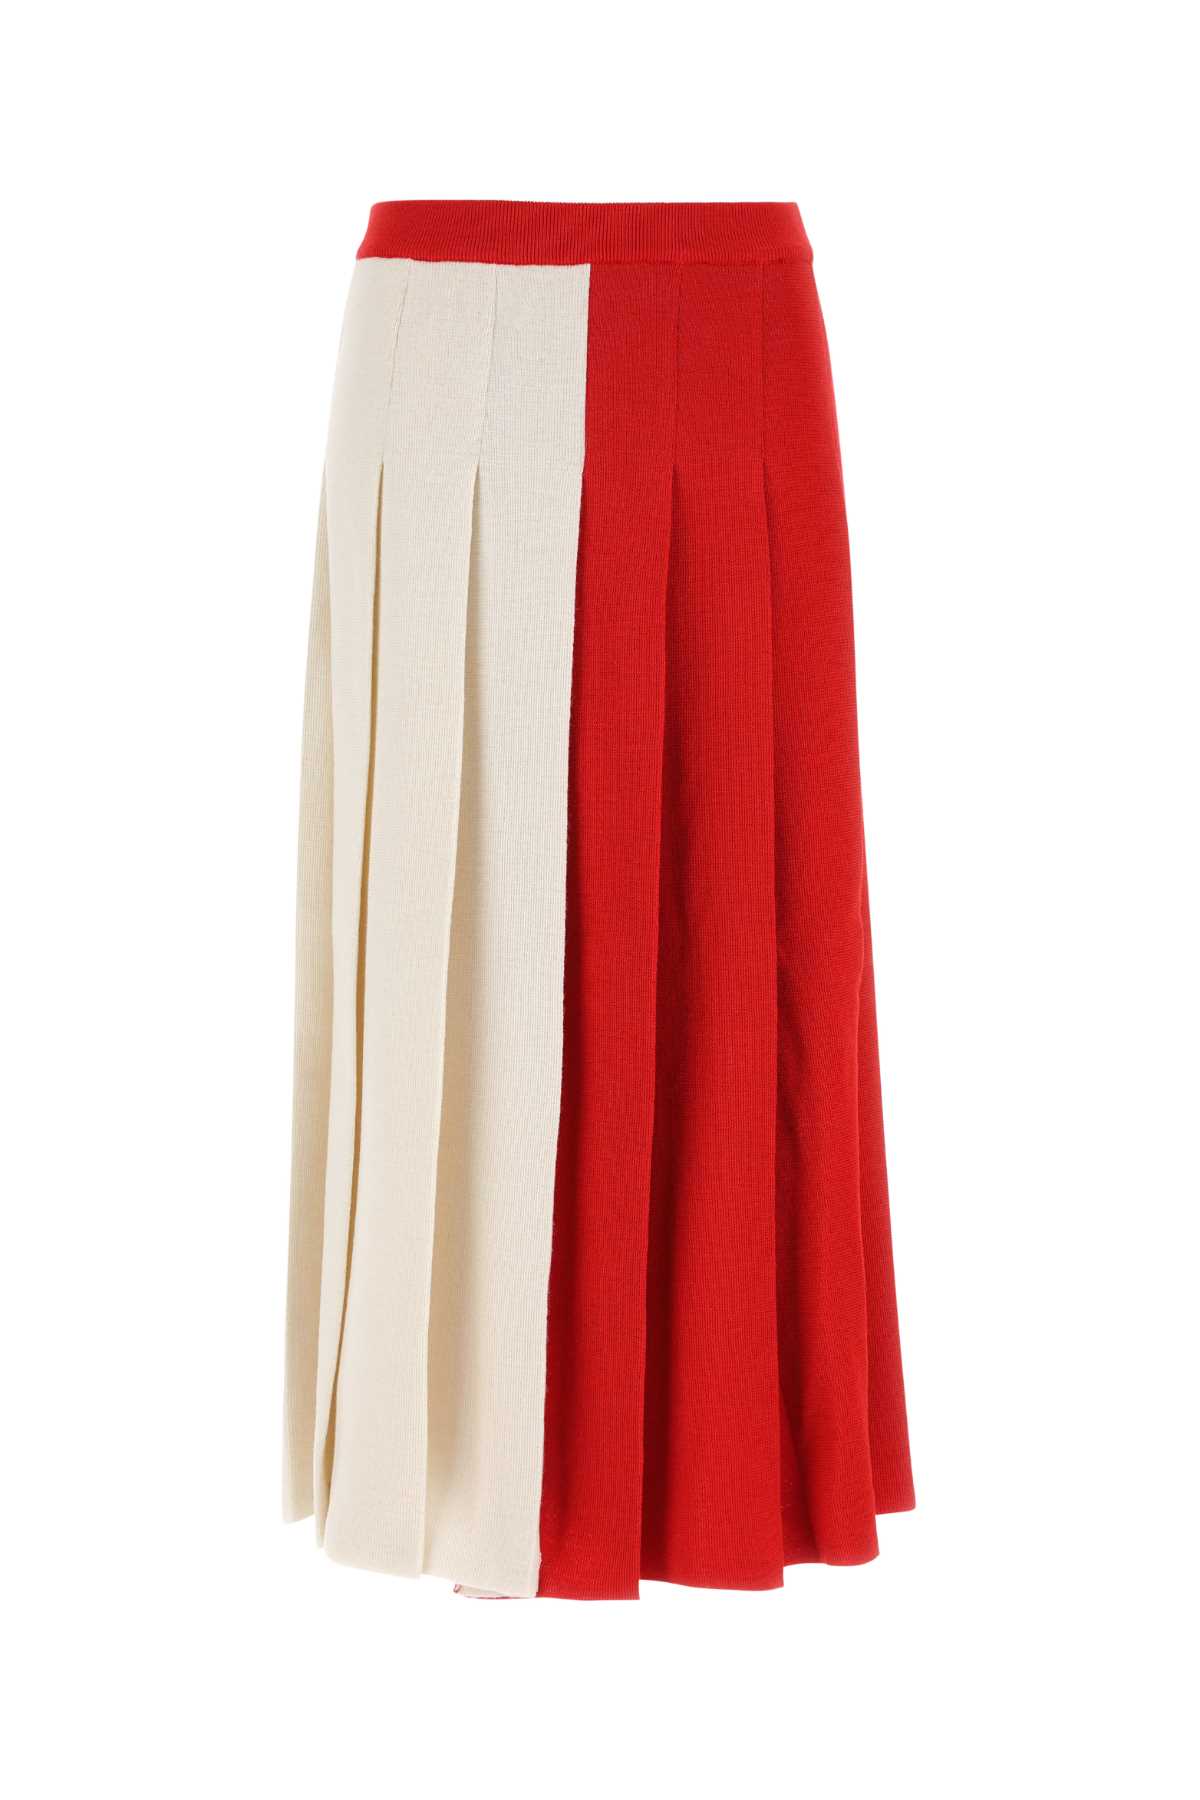 Gucci Two-tone Wool Skirt